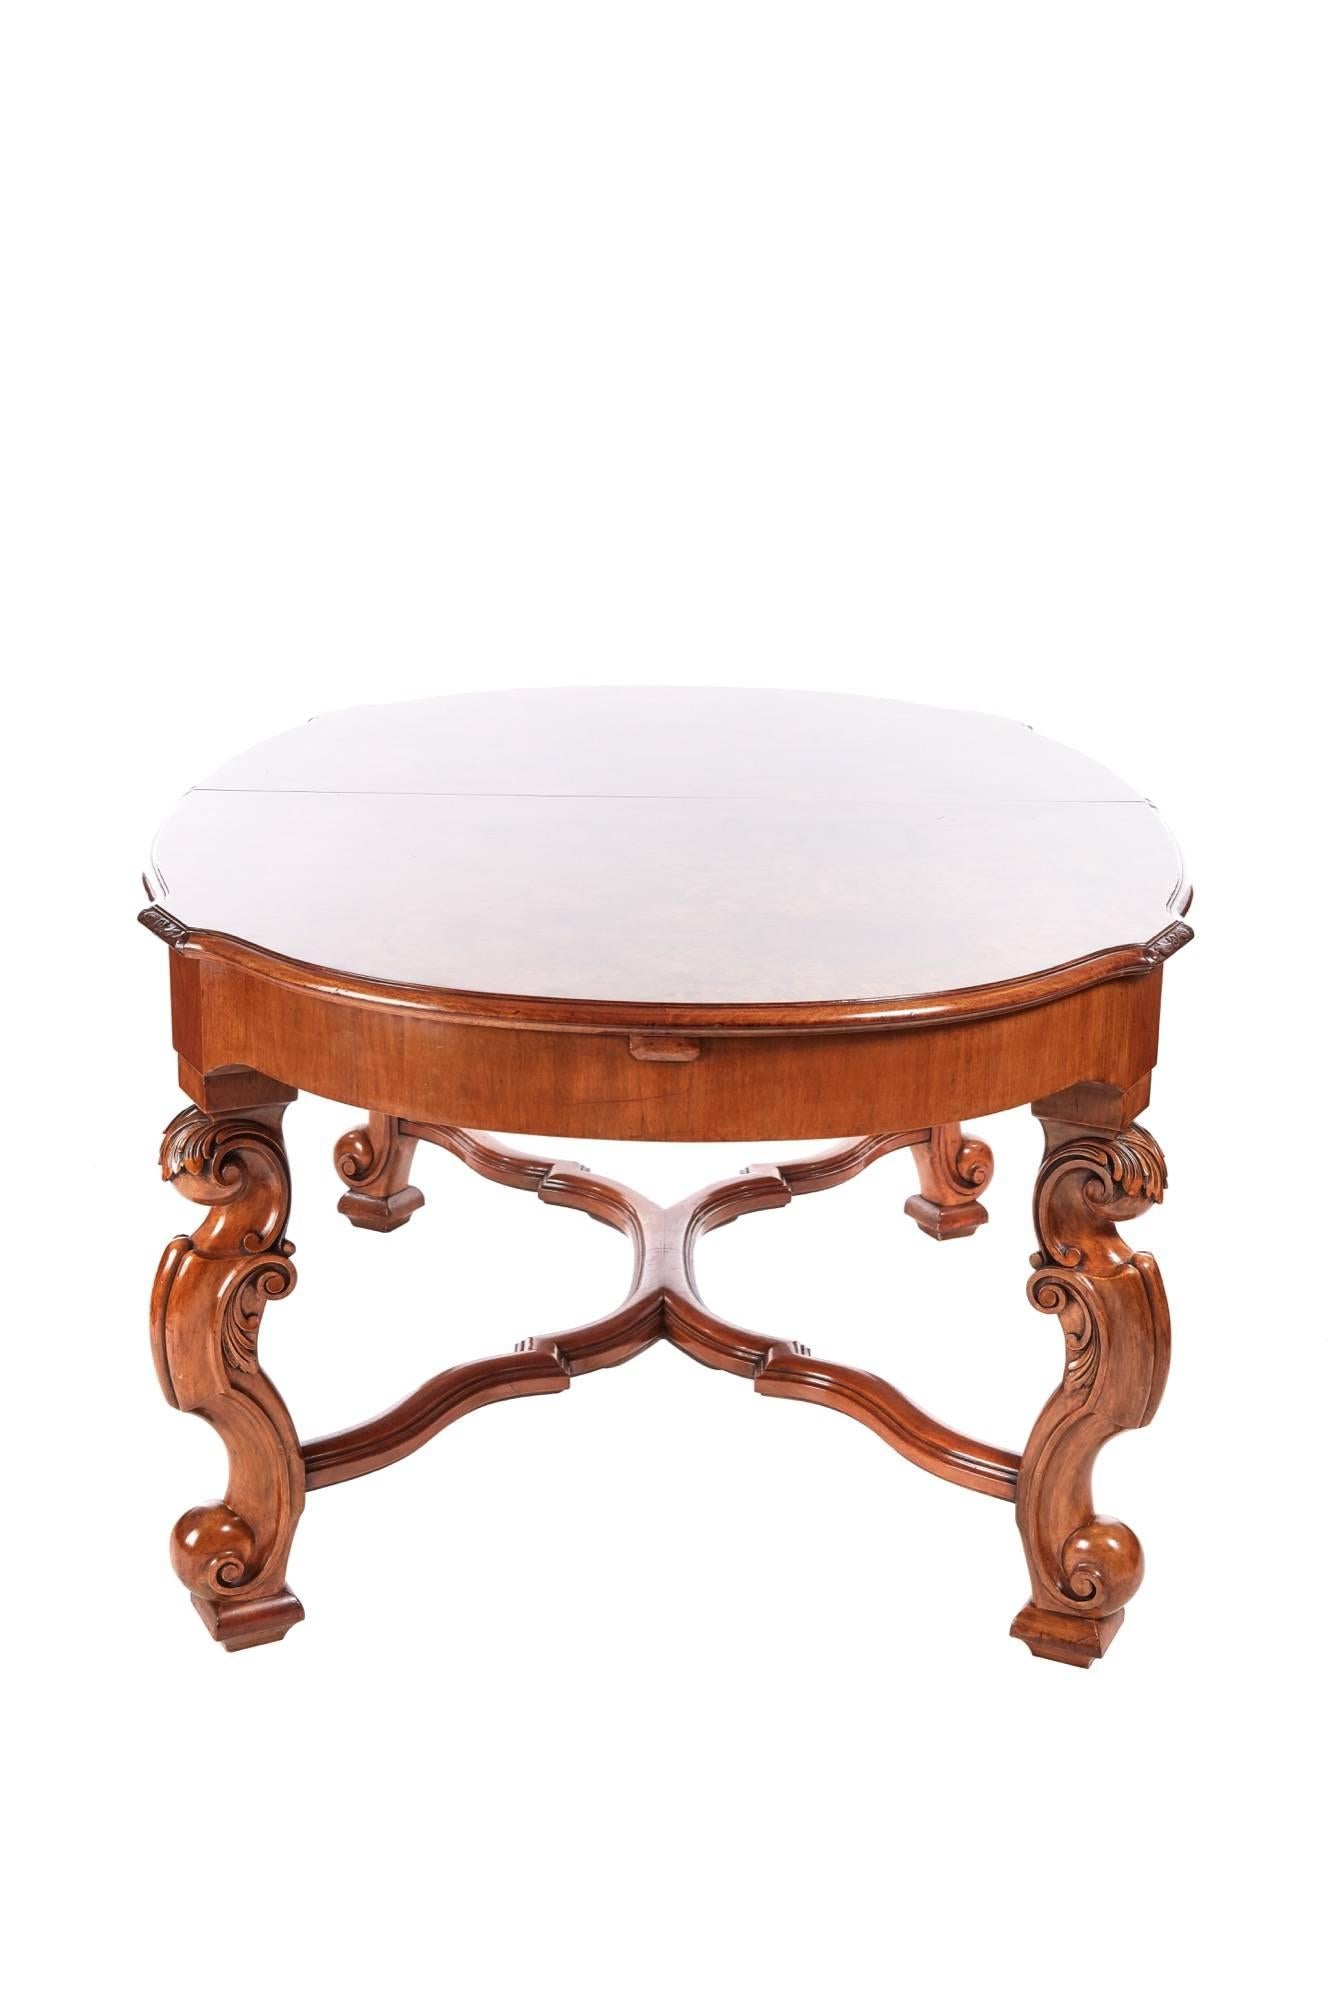 Outstanding antique burr walnut dining table, with a fantastic burr walnut top and two extra leaves carved edge, shaped frieze, standing on four fantastic solid walnut carved shaped cabriole legs, united by a solid walnut shaped stretcher,
Fantastic